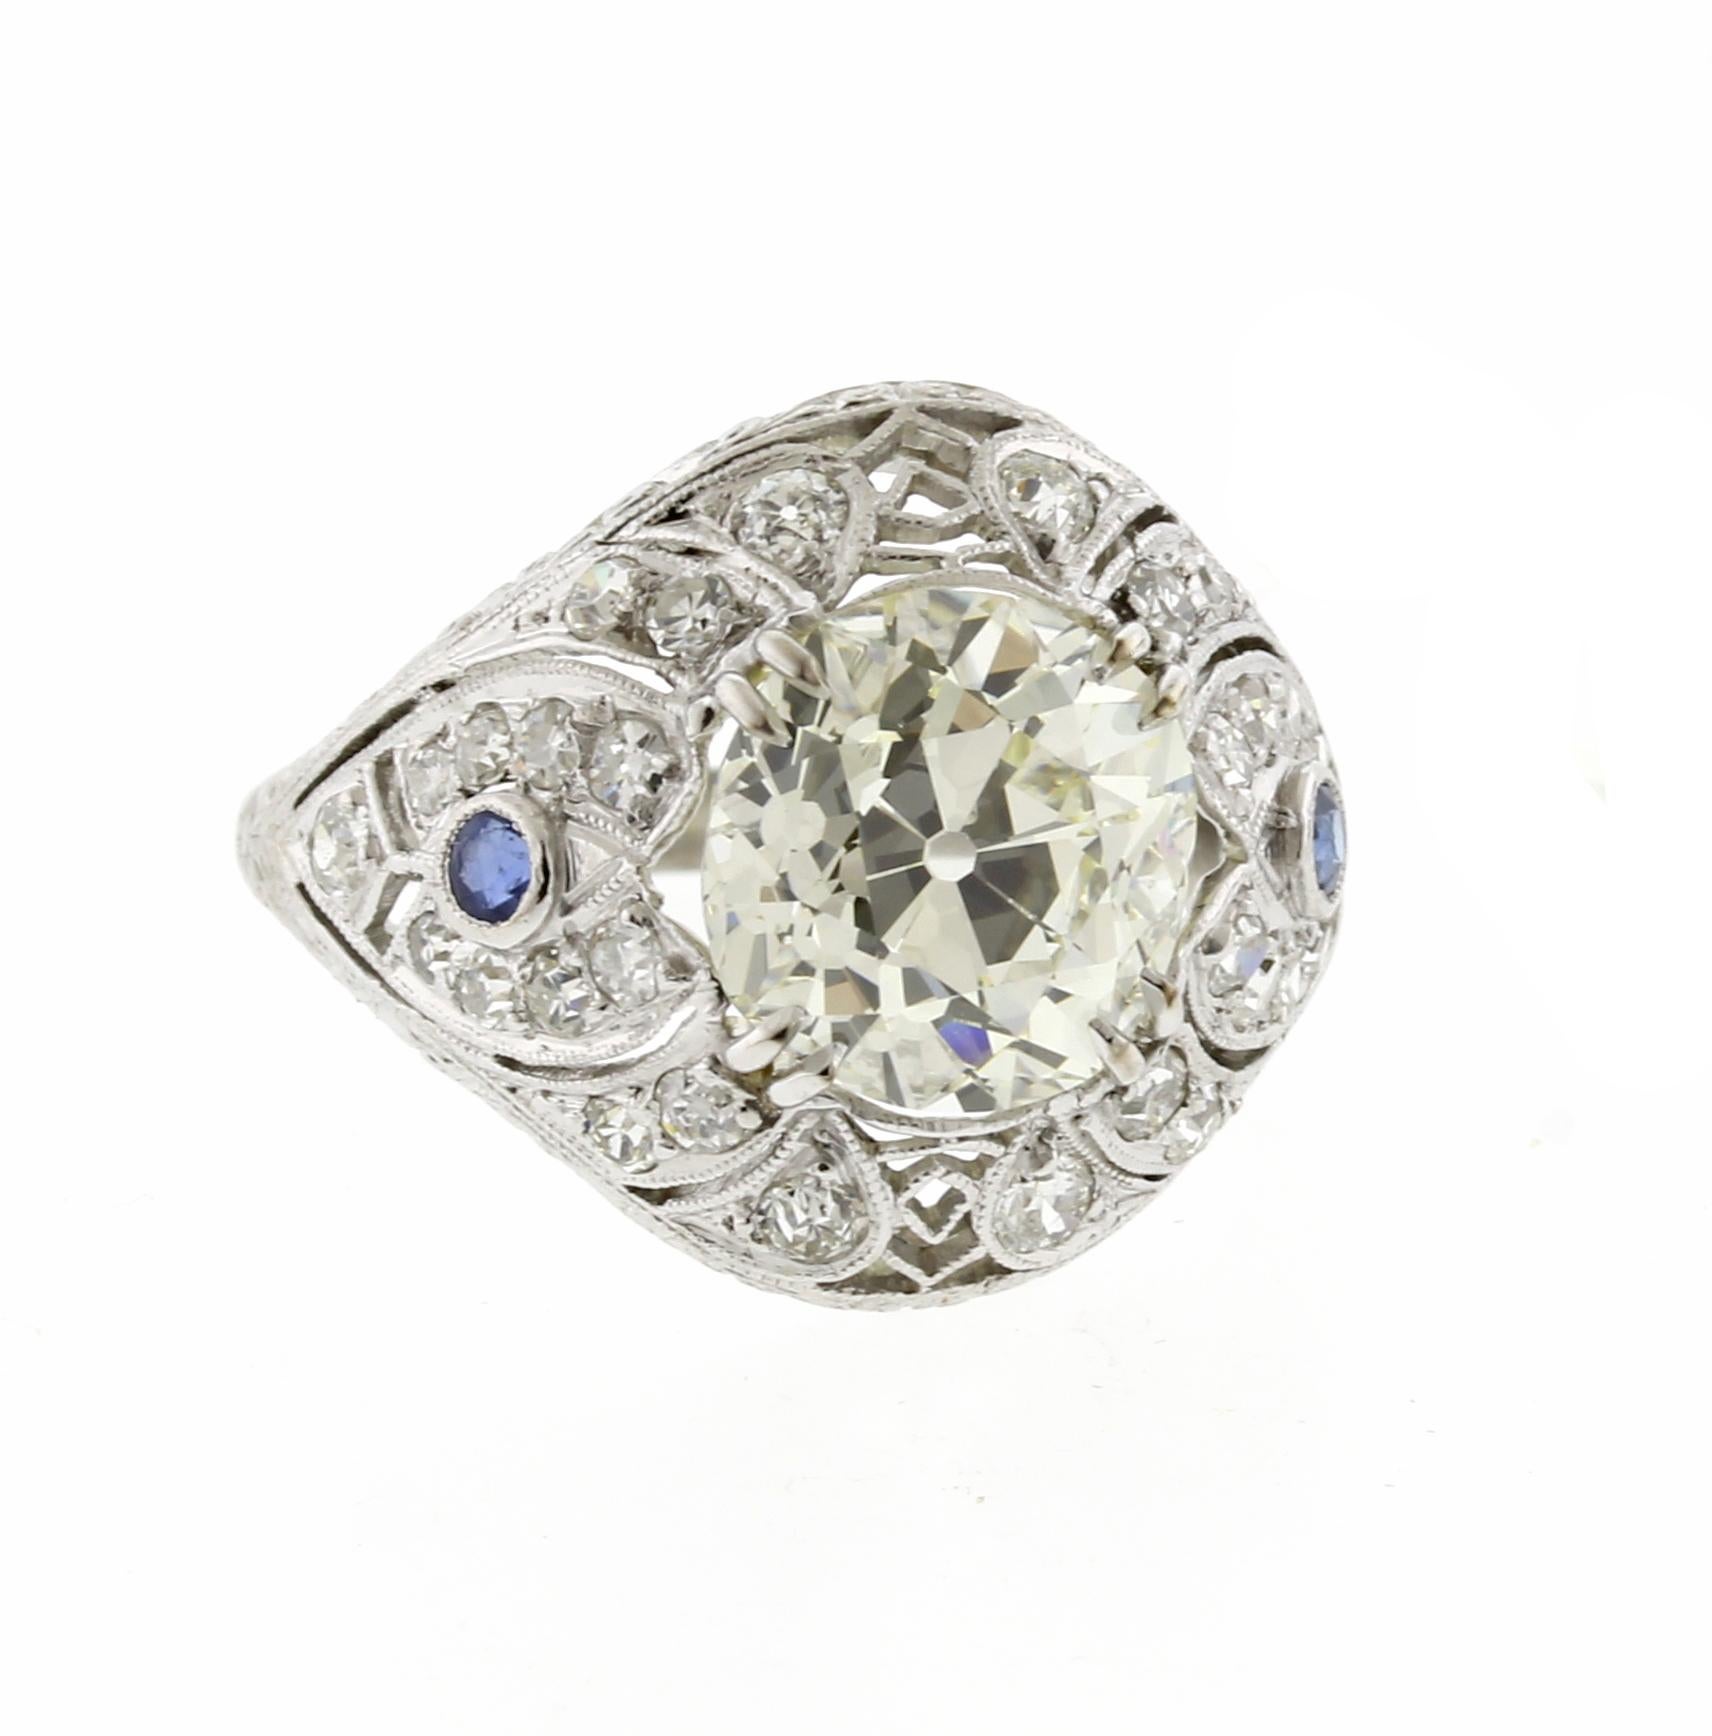 An exquisite example of Art Deco design. This hand made filigree ring boasts a 3.48 carat old European cut diamond. The G.I. A.  certified diamond is N color and VS1 clarity. The warm color radiants sparkle from every direction.  There are an